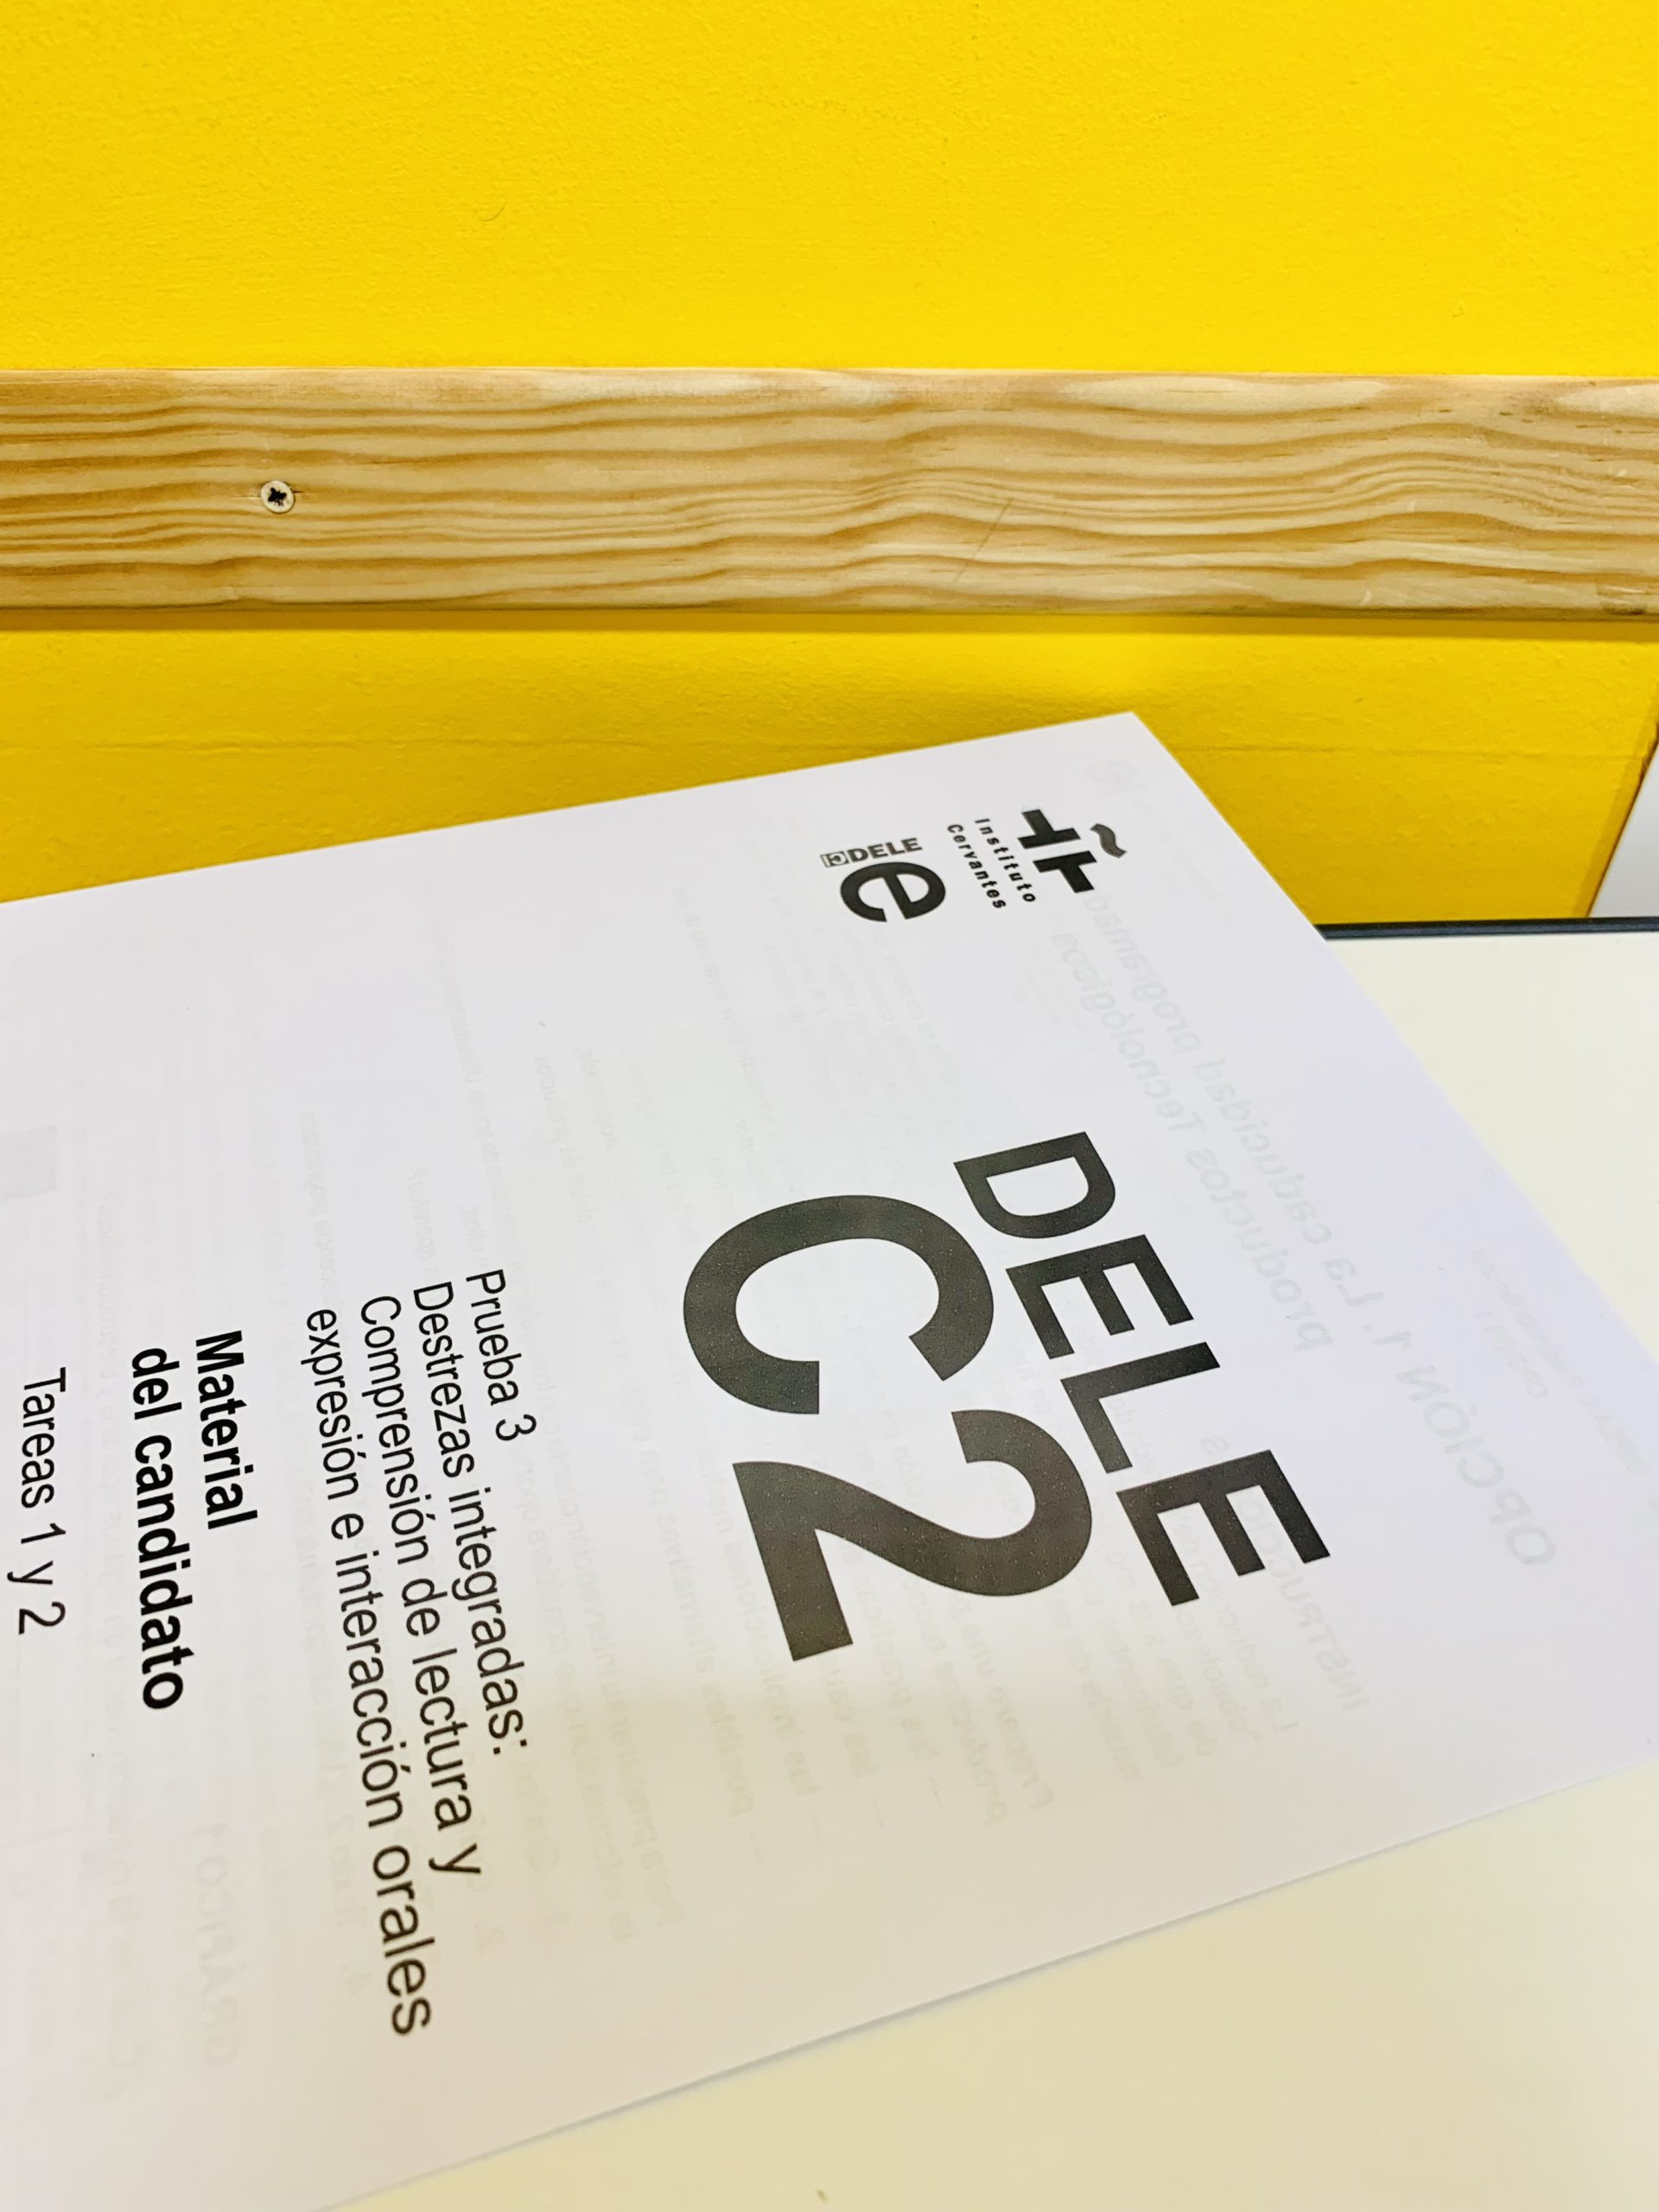 How is the C2 DELE exam tests, scores and tips for pass